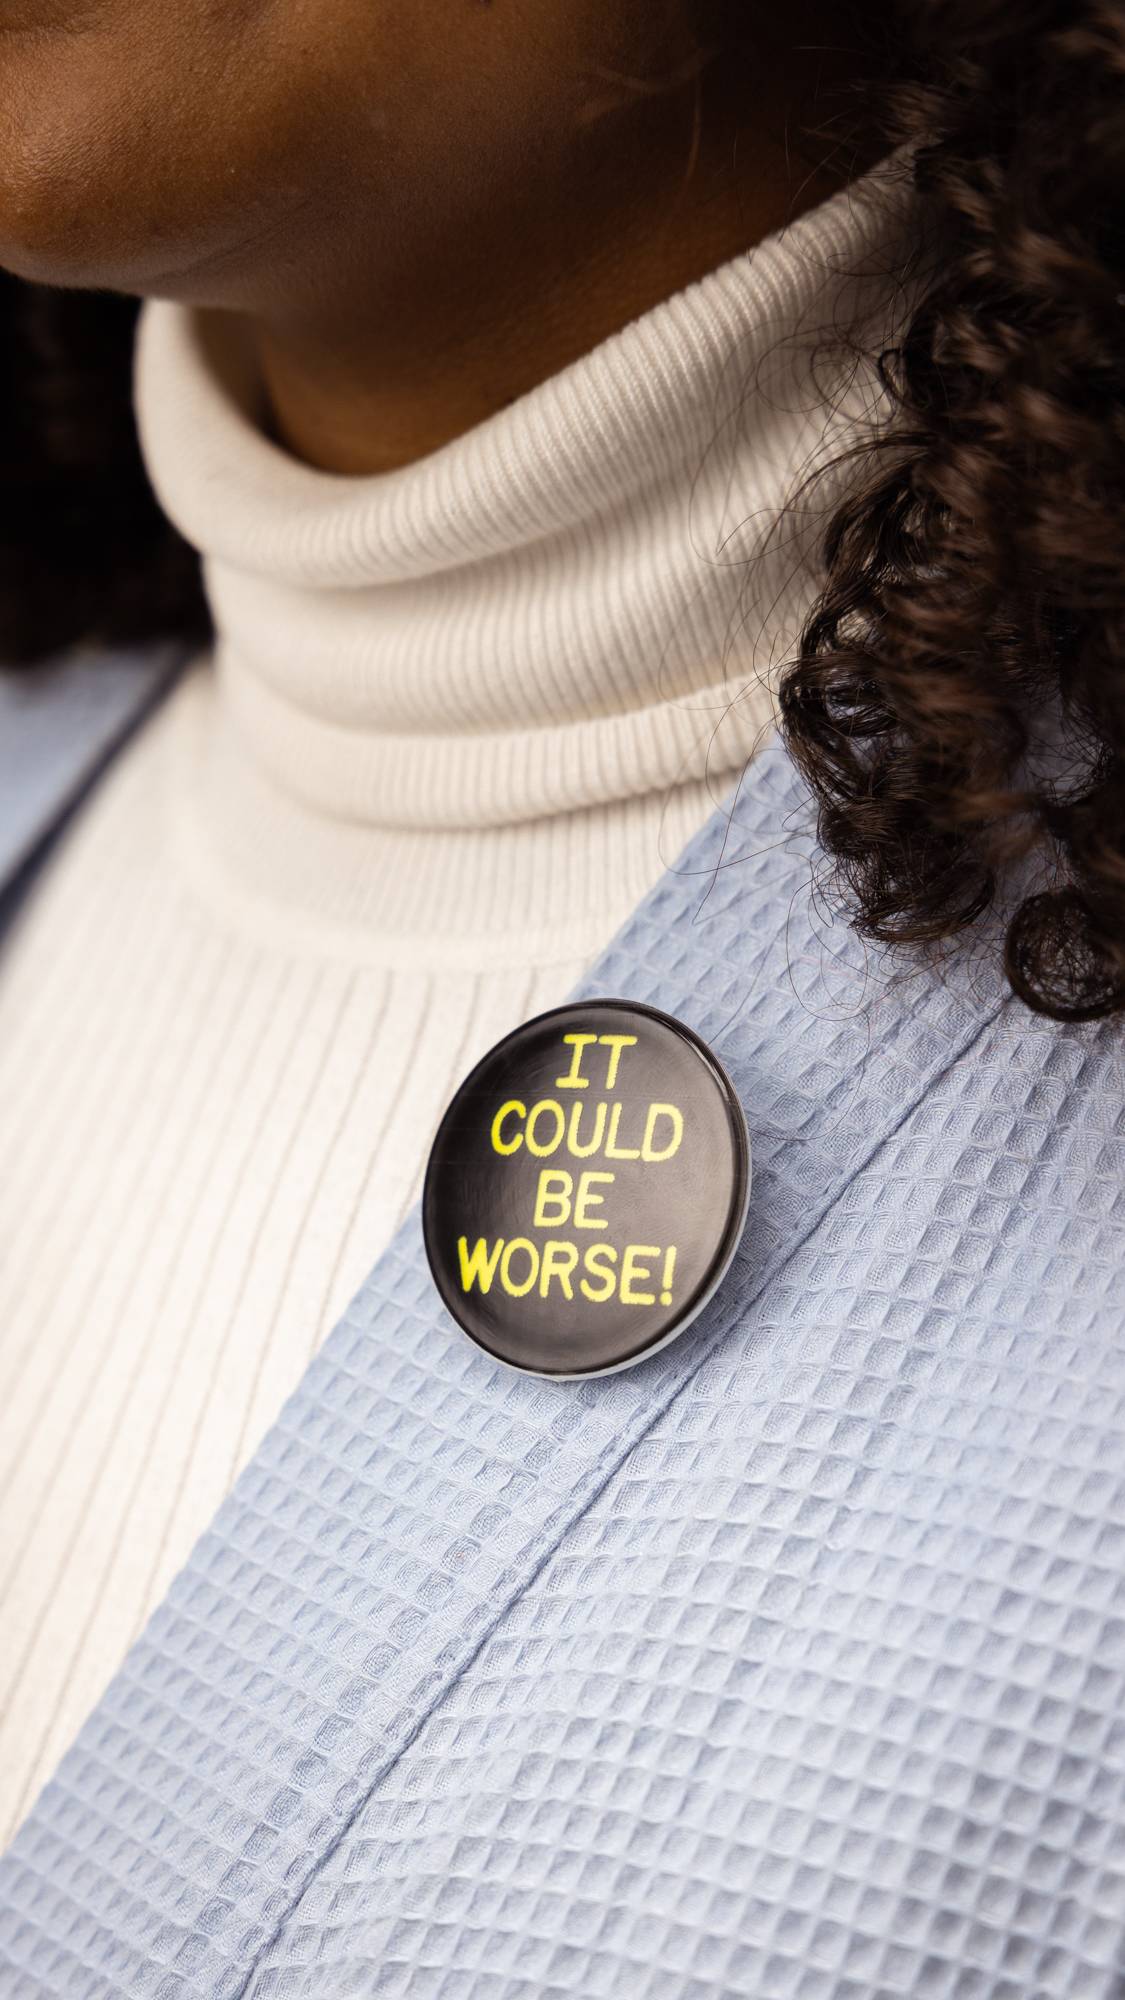 Model is wearing a white turtle neck and a pale blue jacket. They are wearing the "It Could Be Worse" badge on their lapel.